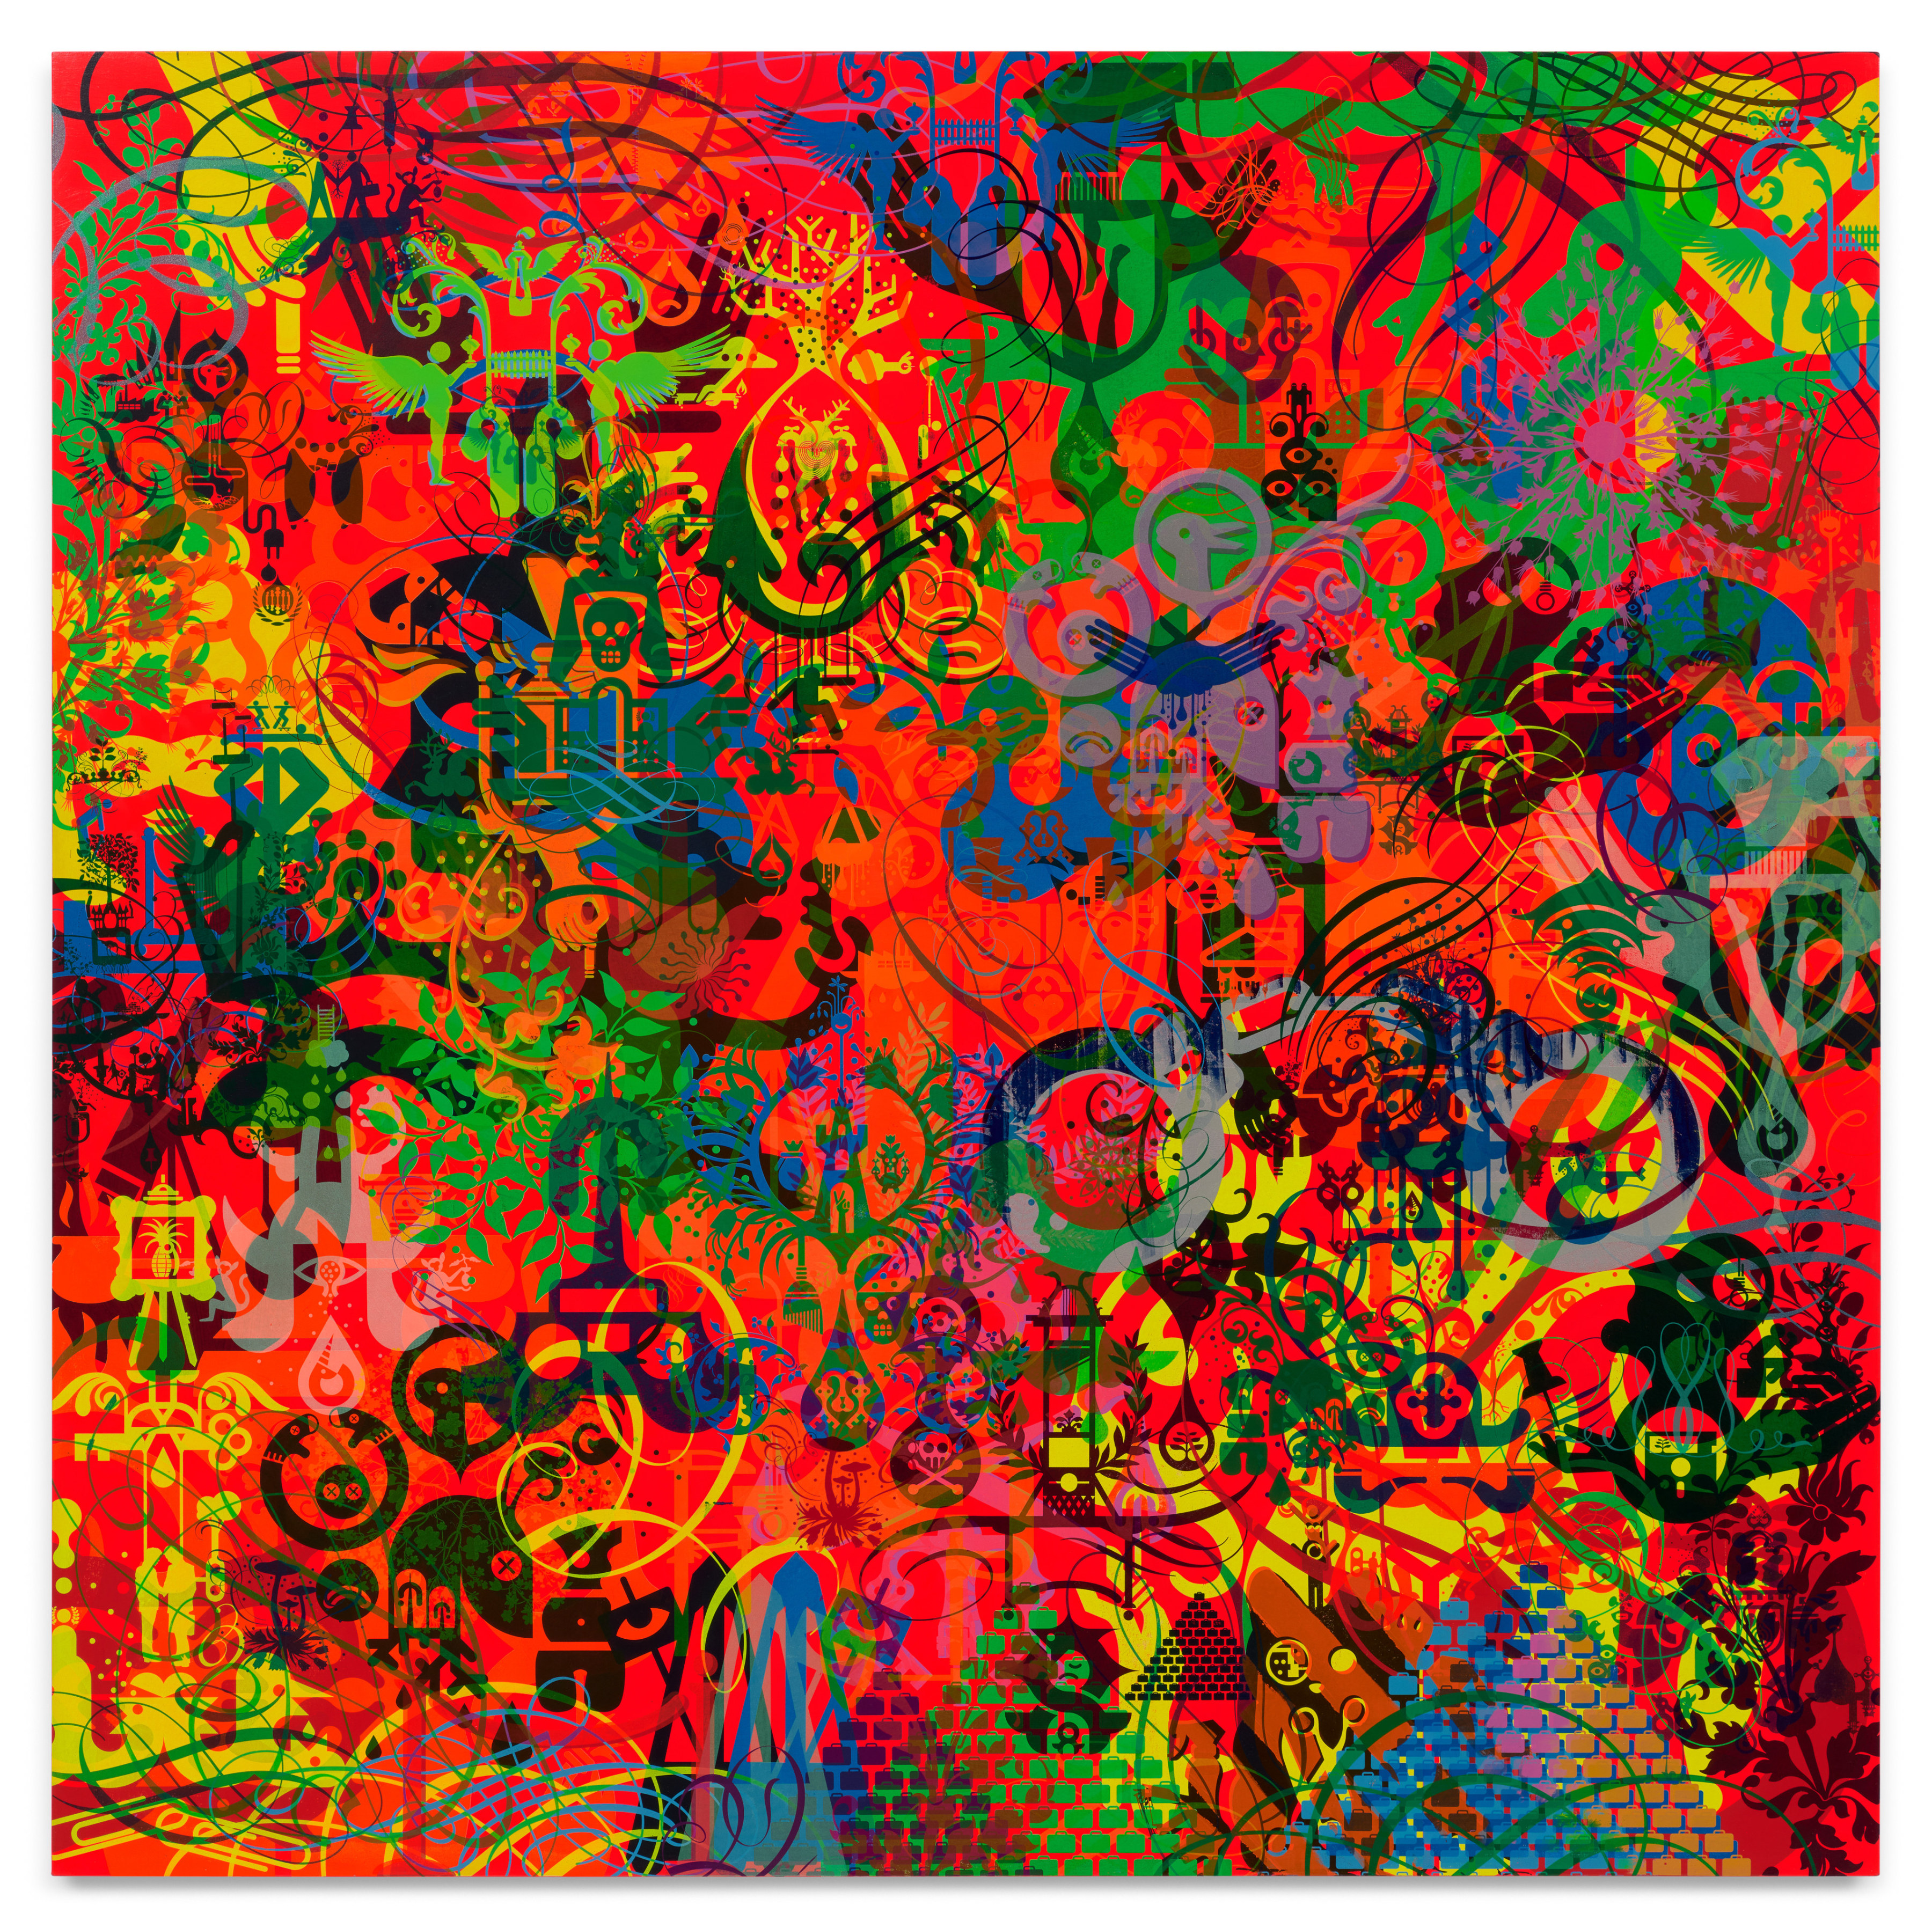 The Formality of Things Actually Occurring, 2013, Acrylic on canvas, 72 x 72 inches, 182.9 x 182.9 cm,&nbsp;MMG#31400